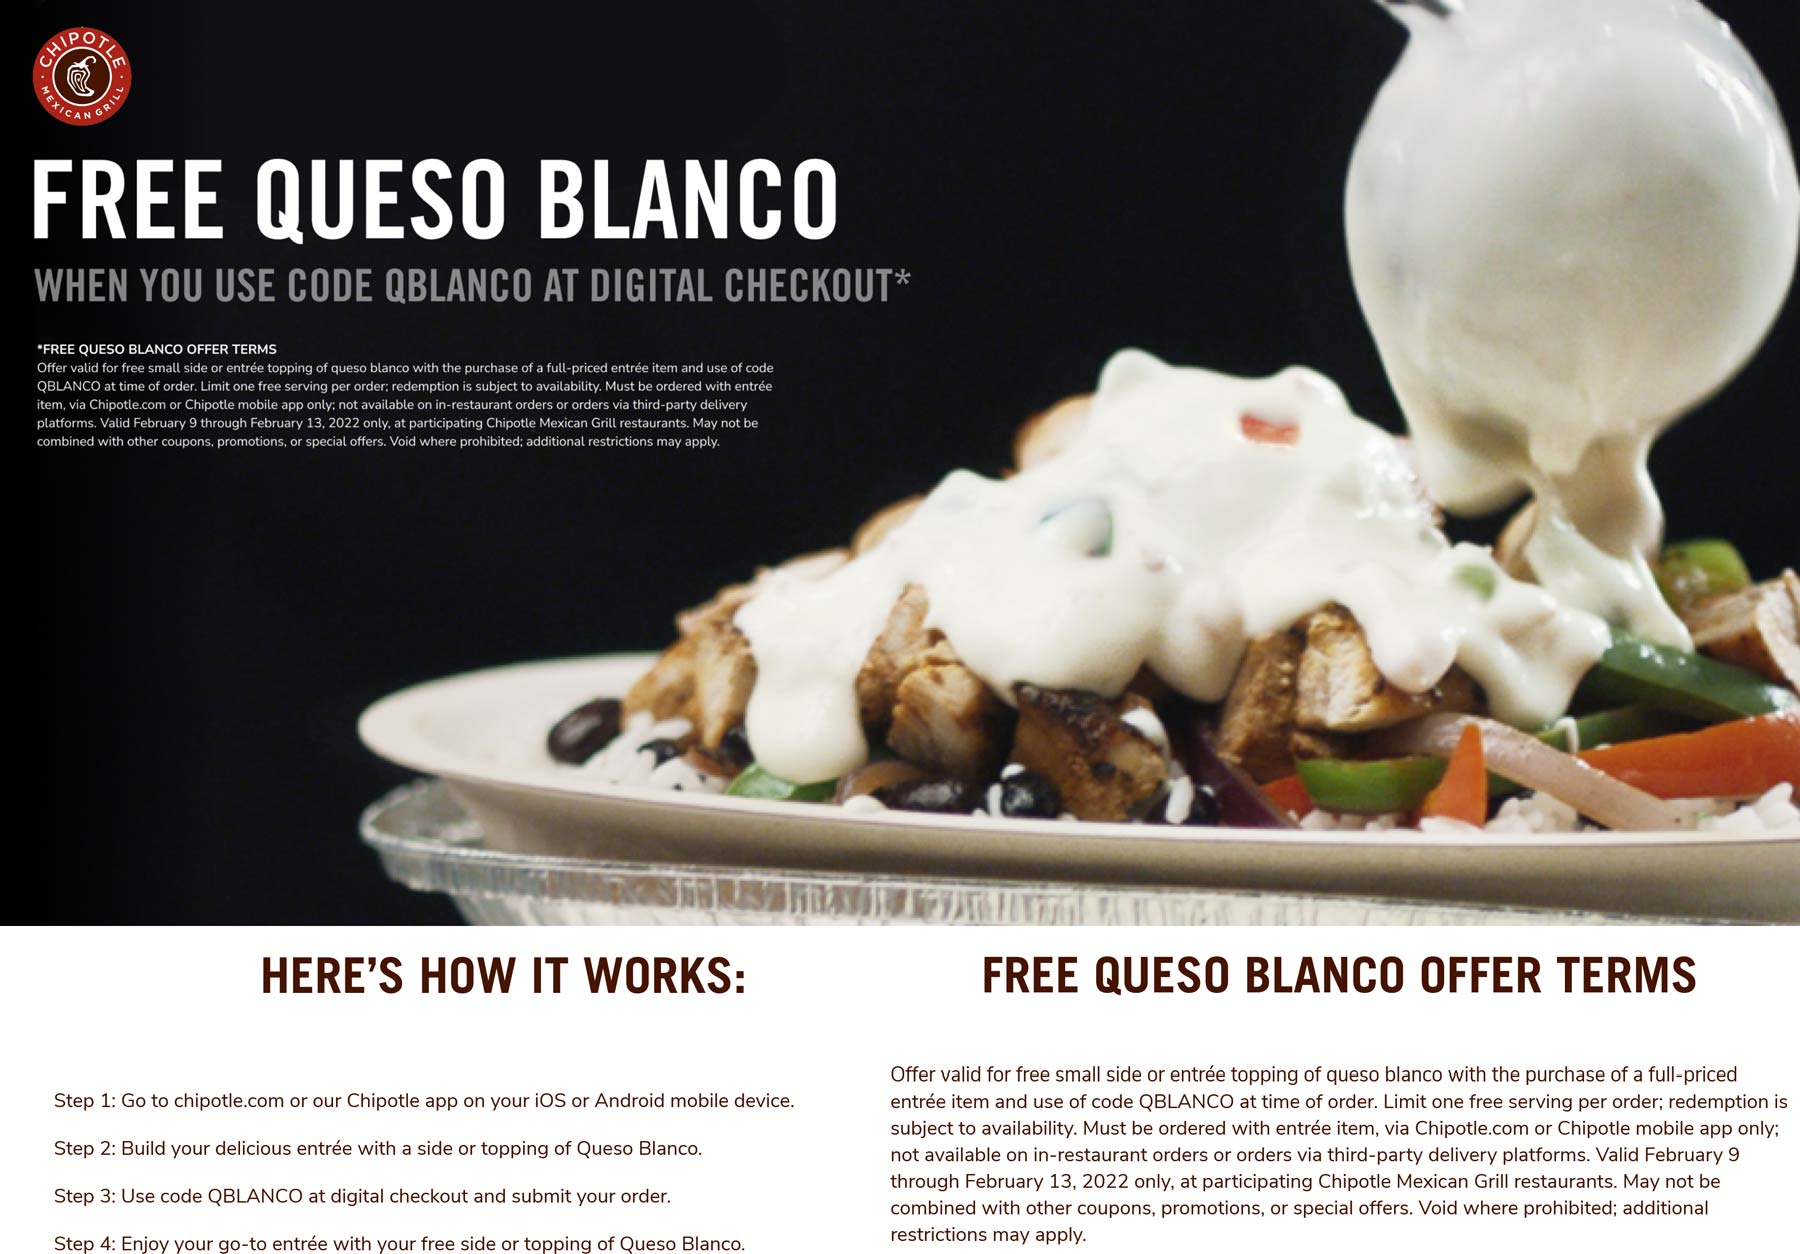 Chipotle restaurants Coupon  Free queso with your entree at Chipotle via promo code QBLANCO #chipotle 